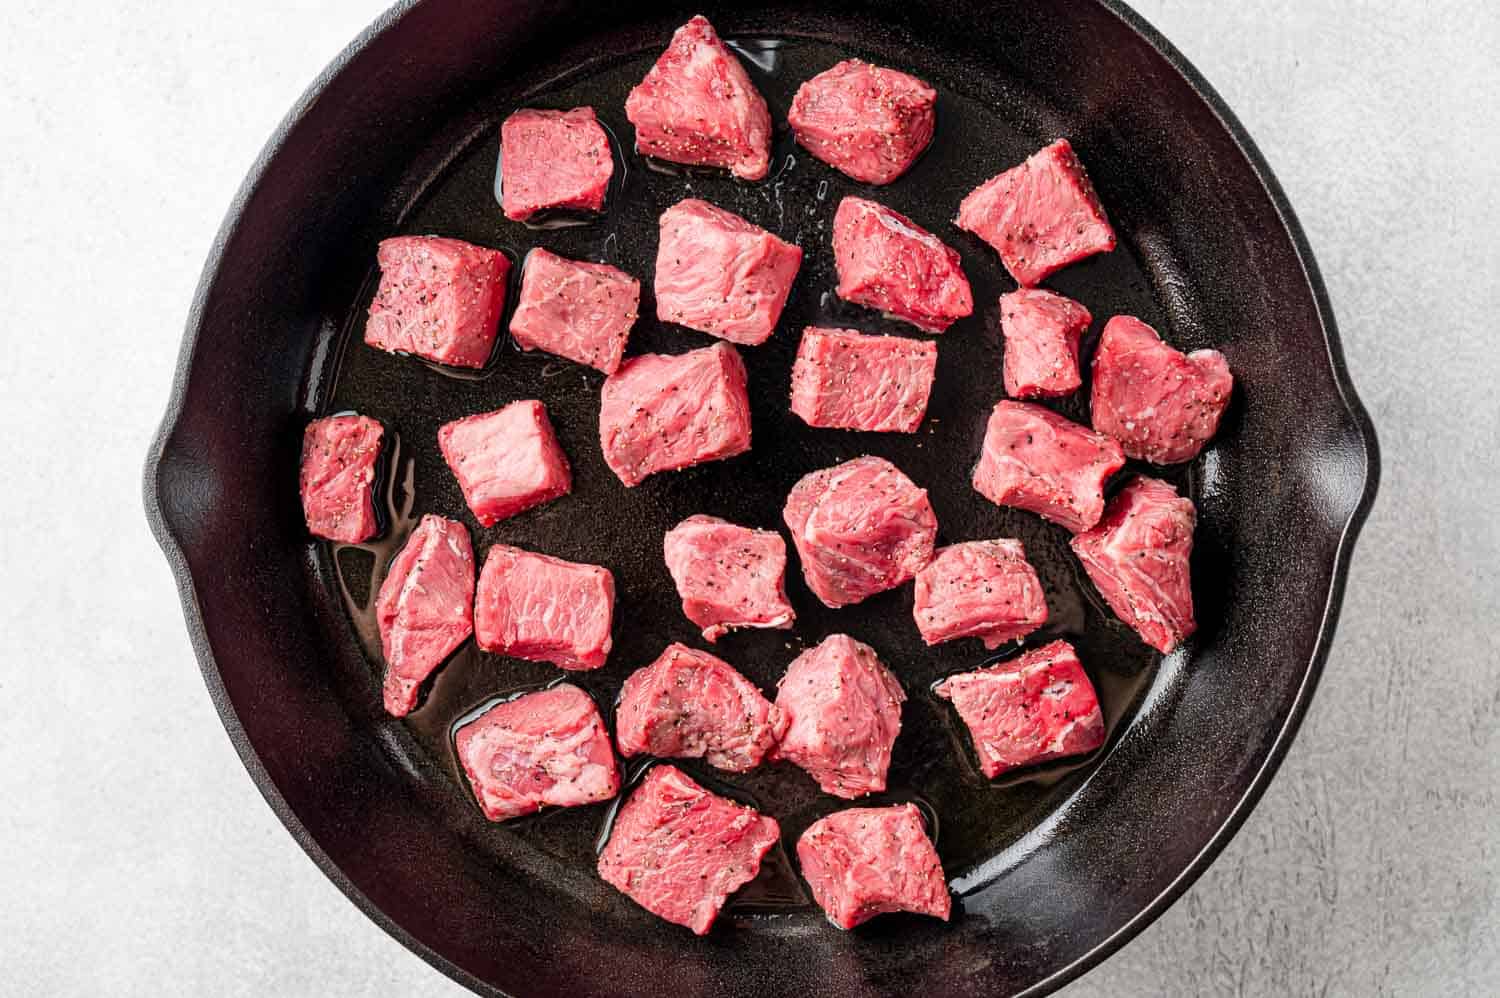 Uncooked steak bites in a single layer in pan.